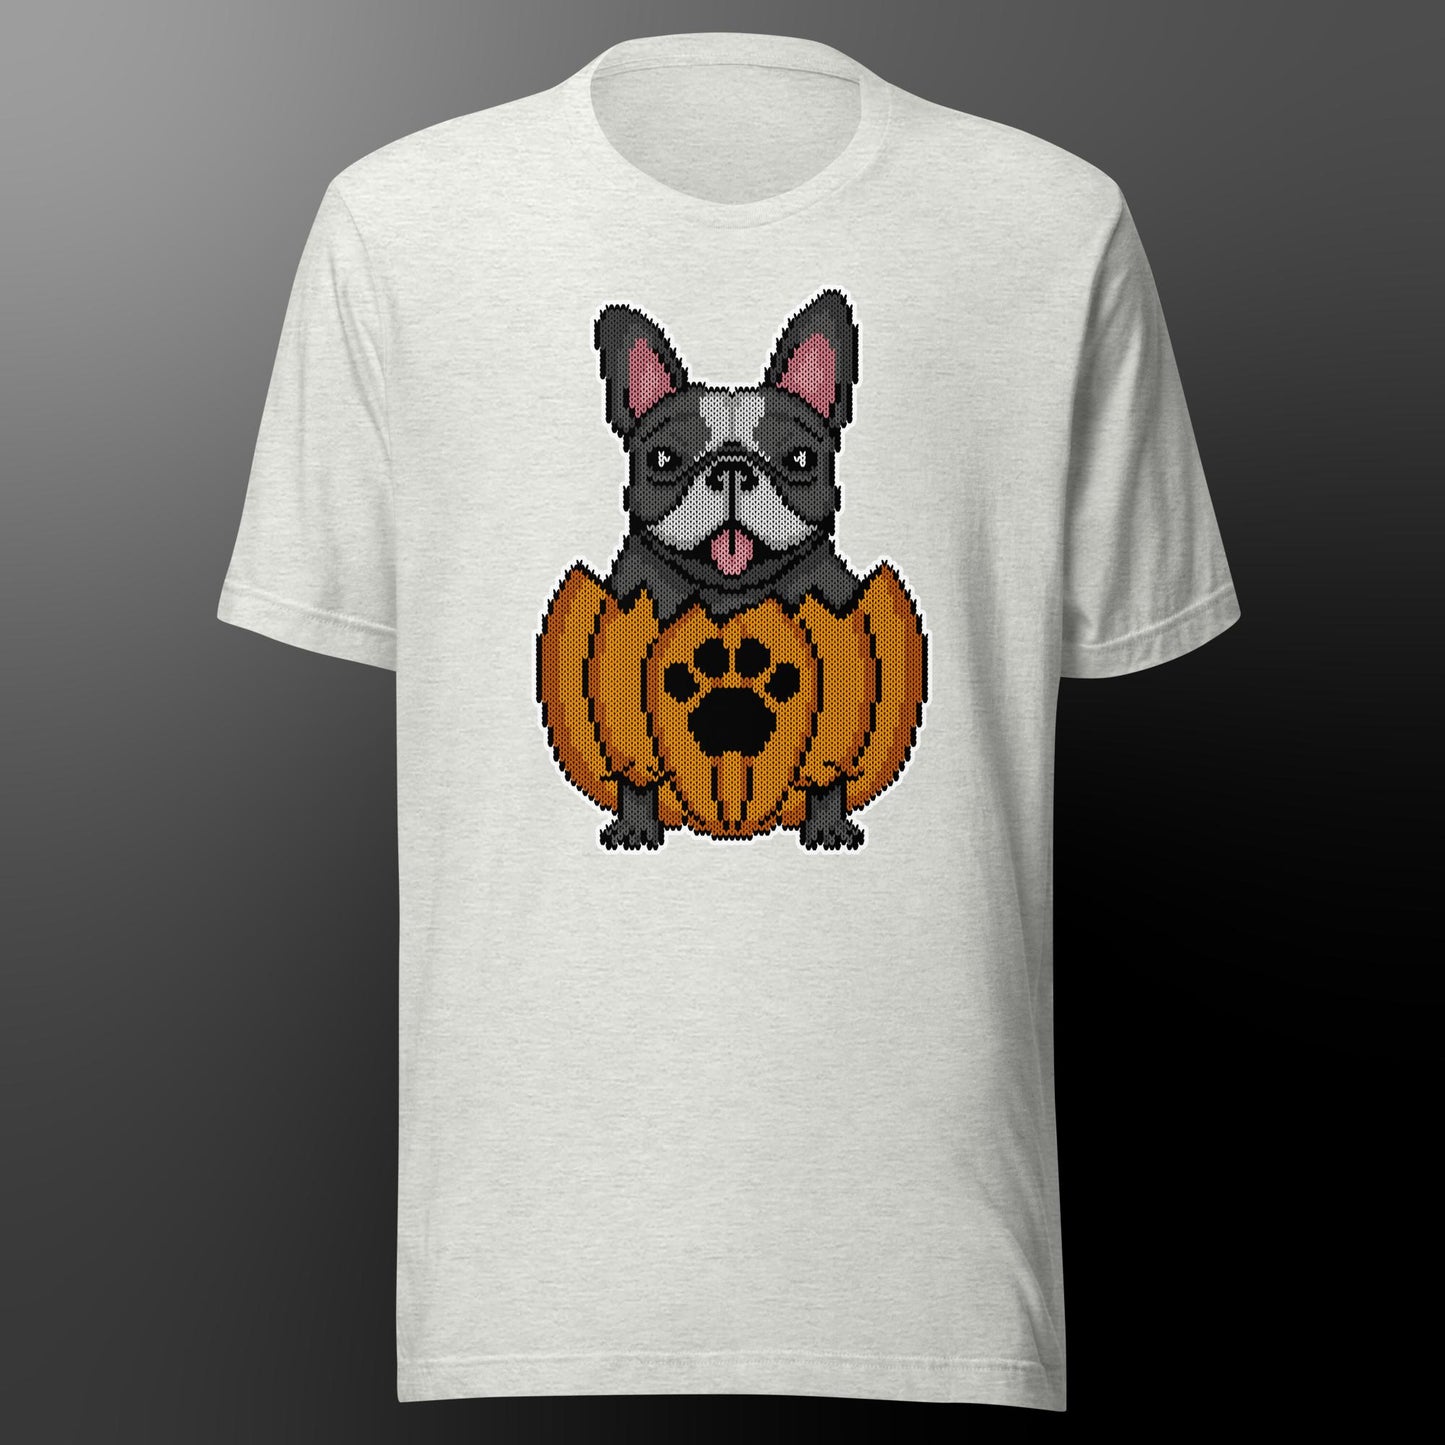 Halloween shirt with frenchie (fur color black and white)